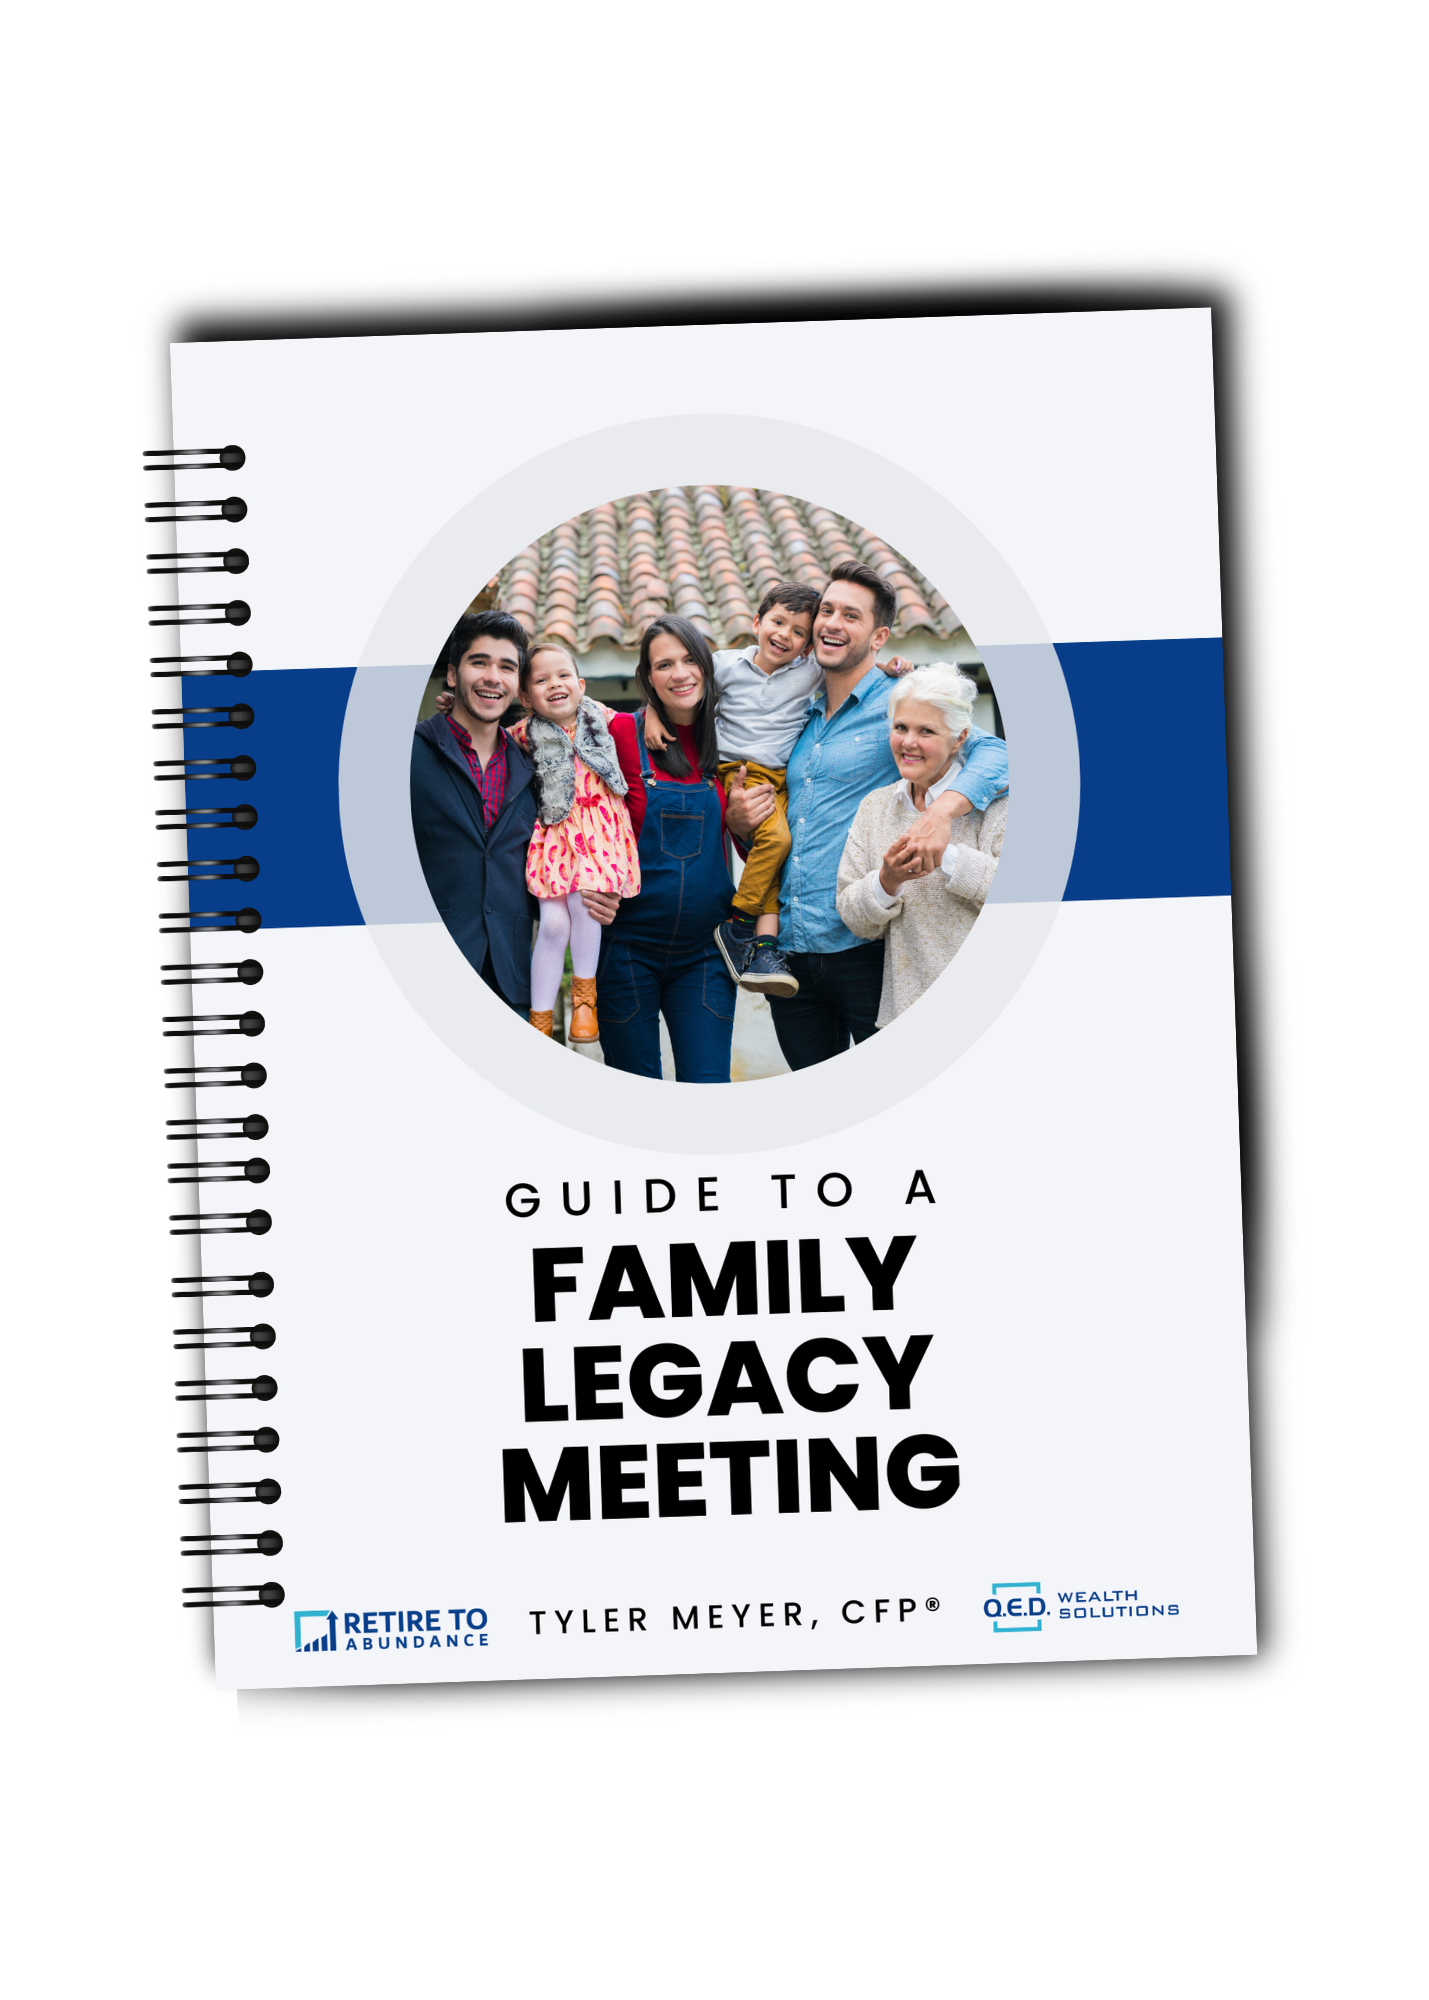 Image of a book titled Guide to a Family Legacy Meeting